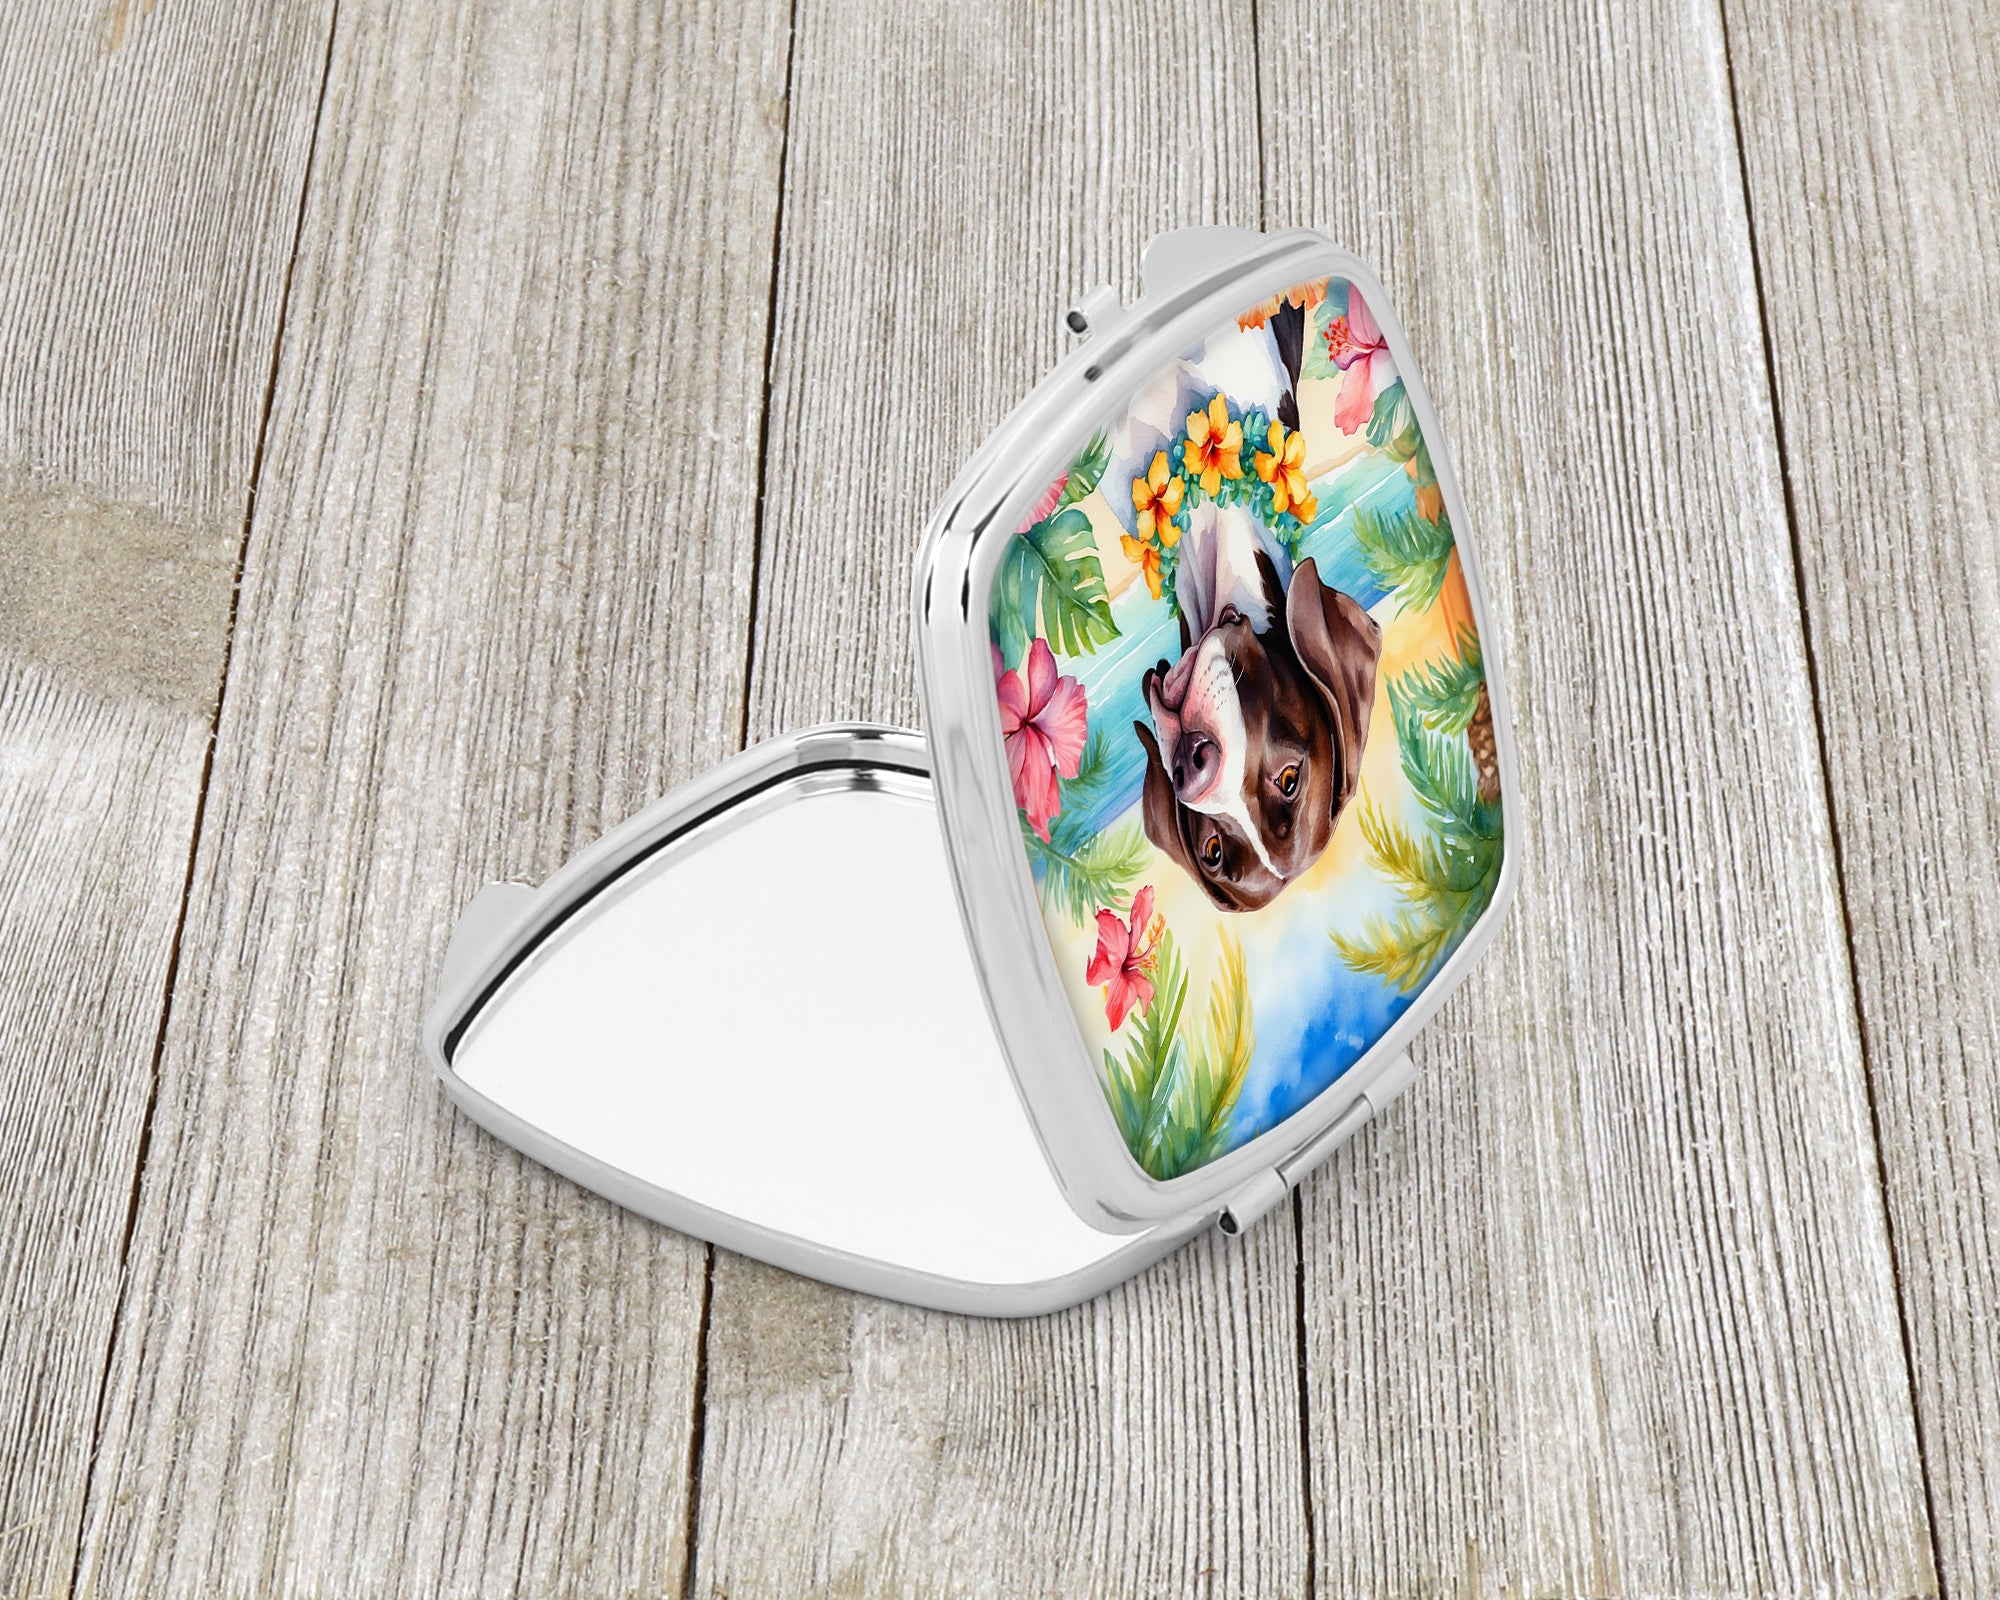 Buy this Pointer Luau Compact Mirror